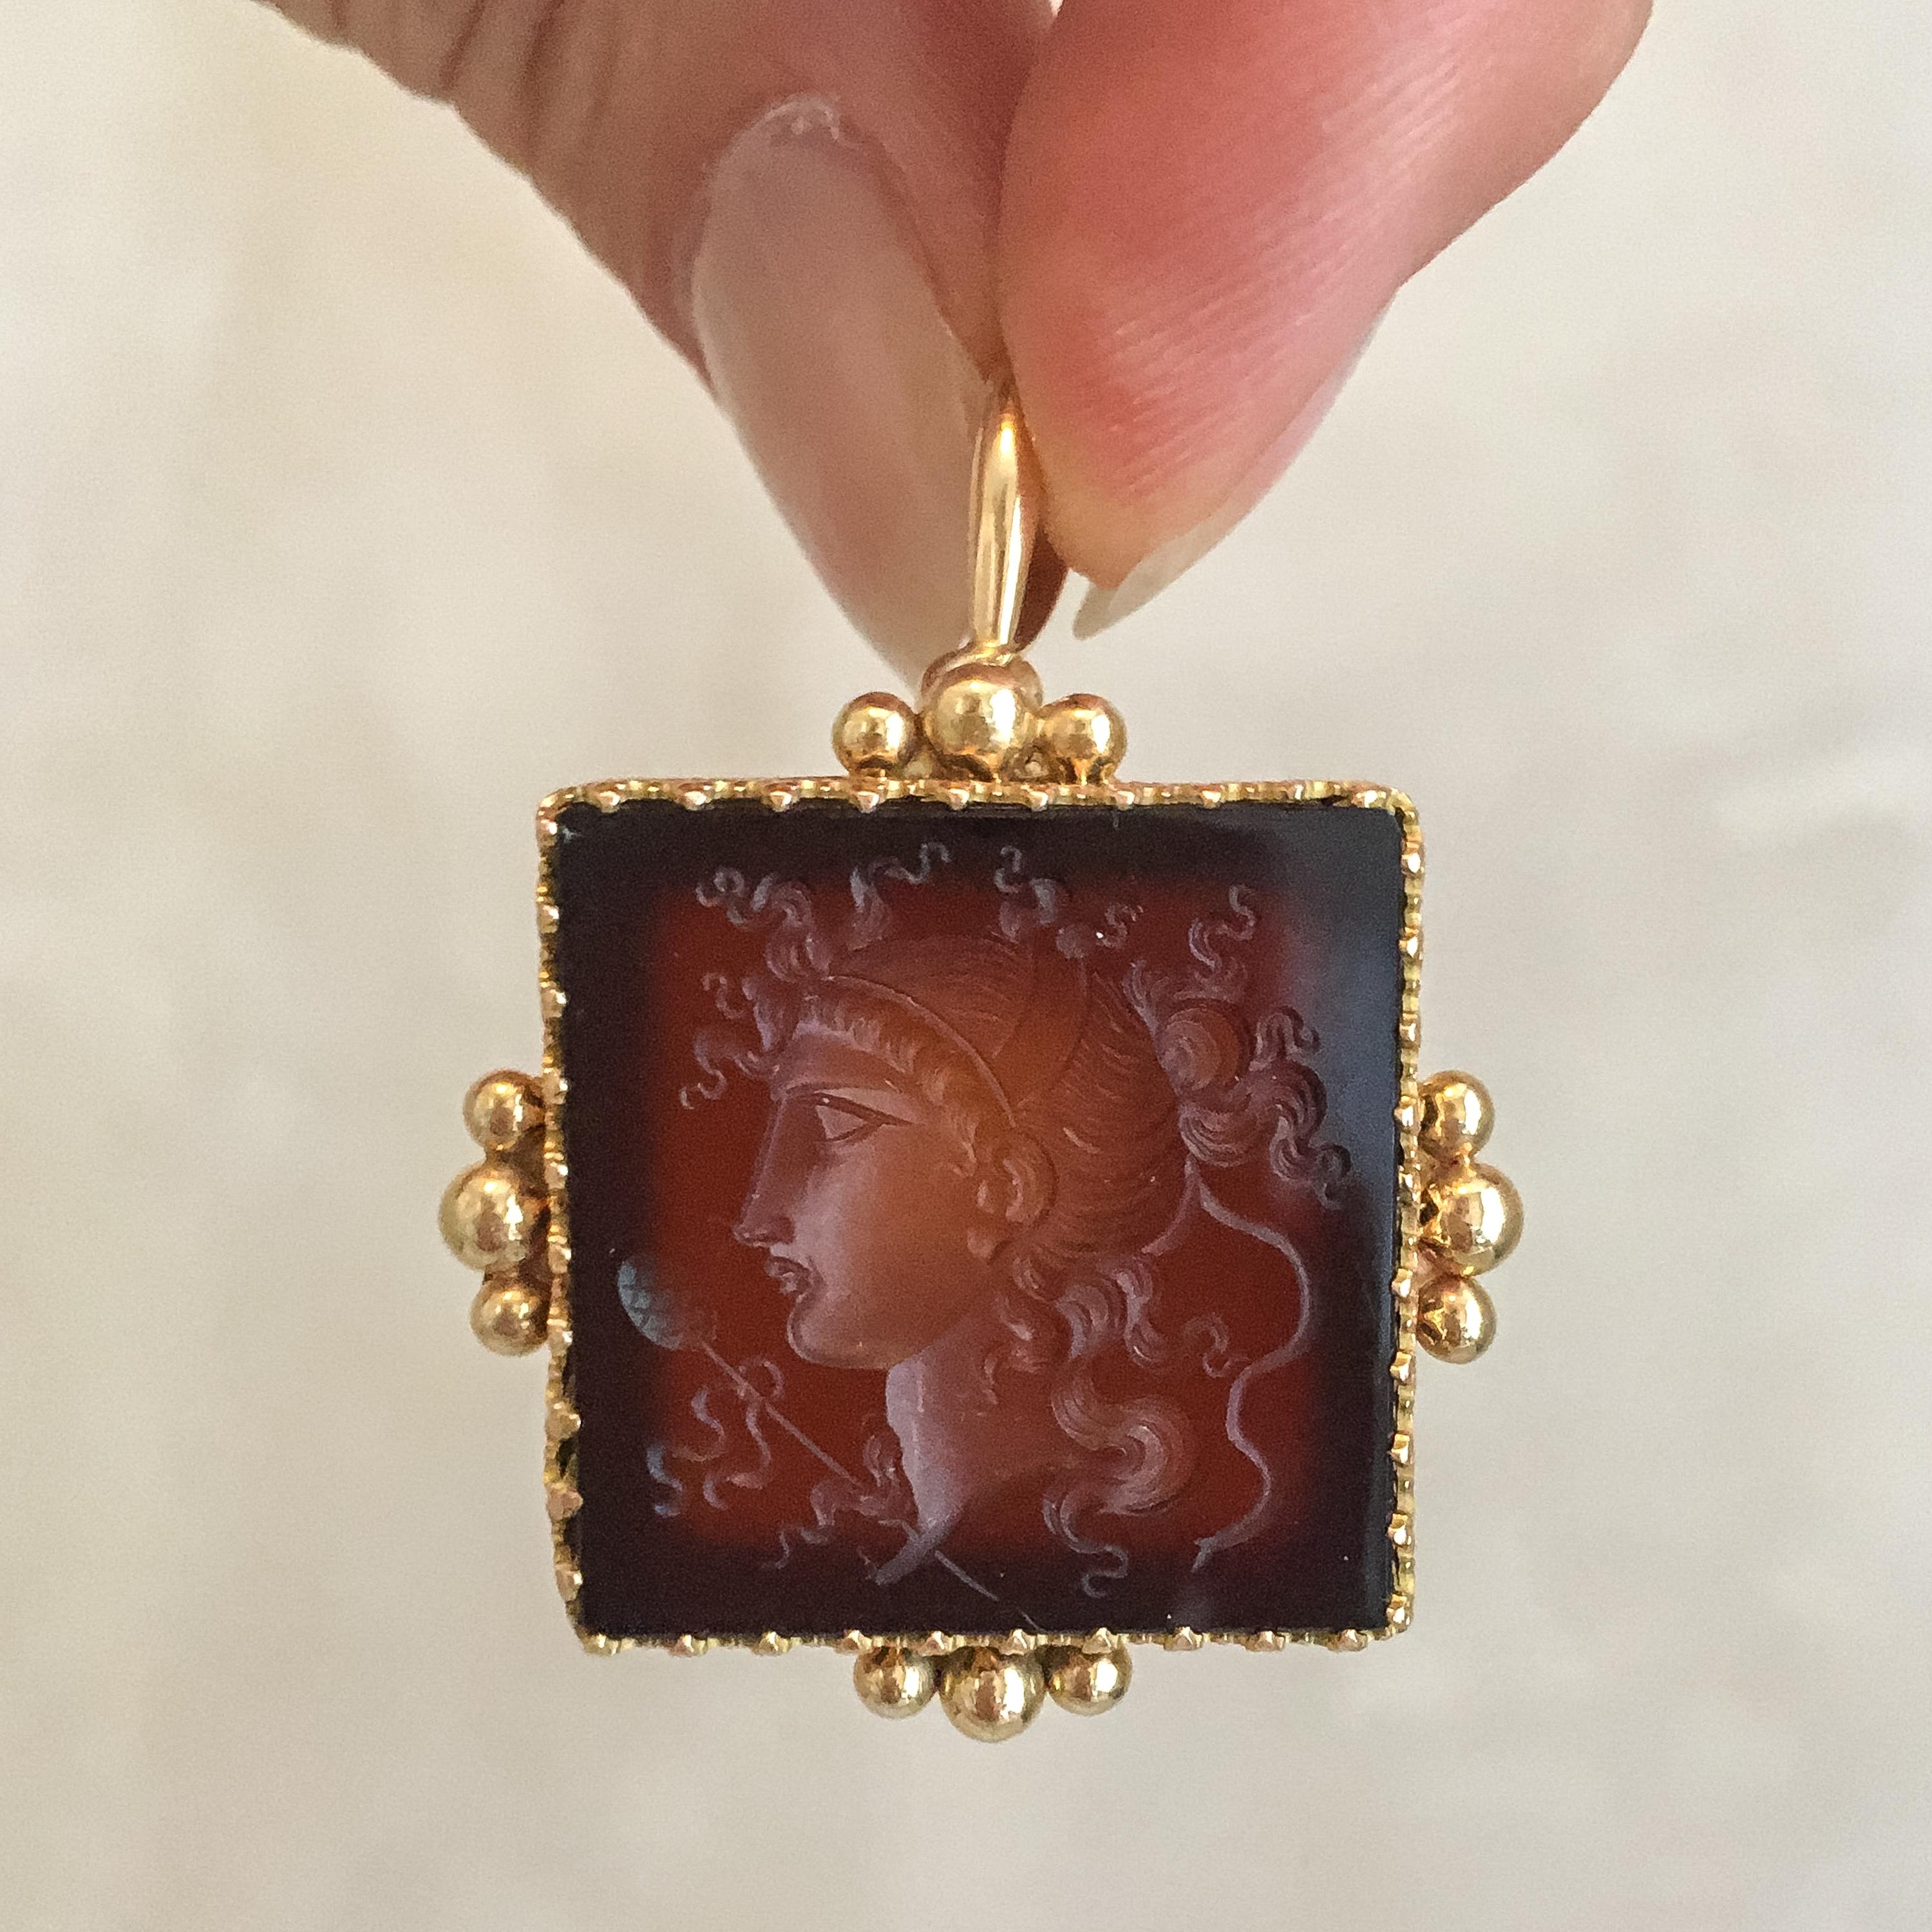 A neo-classical agate intaglio pendant created in a 14 karat gold frame. The square-shaped intaglio features a neo-classical woman in profile set in a gold frame with beading on each side. The intaglio is clearly a work of a great gem carver. The